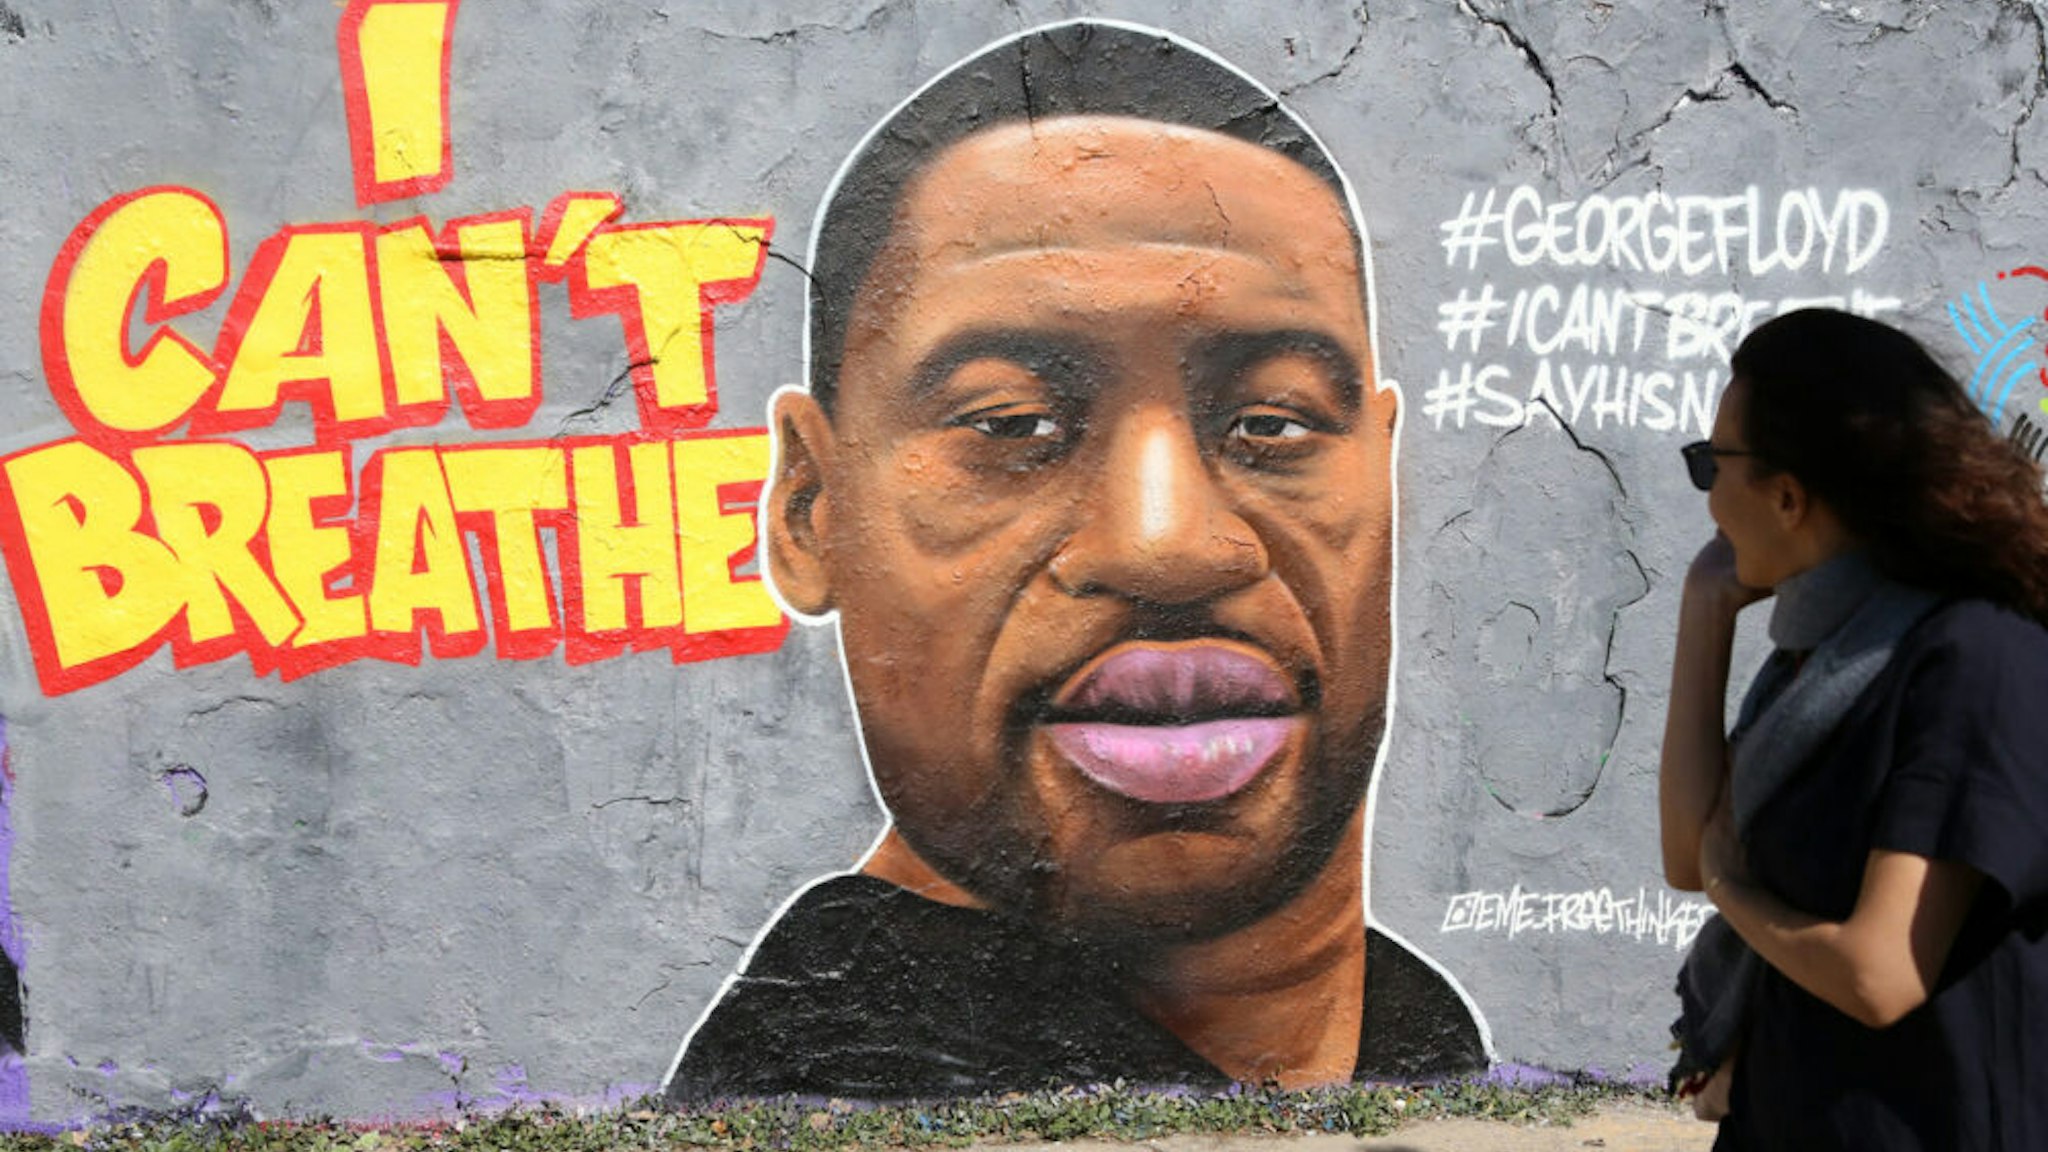 BERLIN, GERMANY - May 30: Street art commemorating George Floyd, killed in police custody in Minneapolis after footage emerged of him pleading for air as a police officer kneeled on his neck, is seen on May 30, 2020 in Berlin, Germany. One of the four officers involved was arrested and charged with murder after three days of protests.